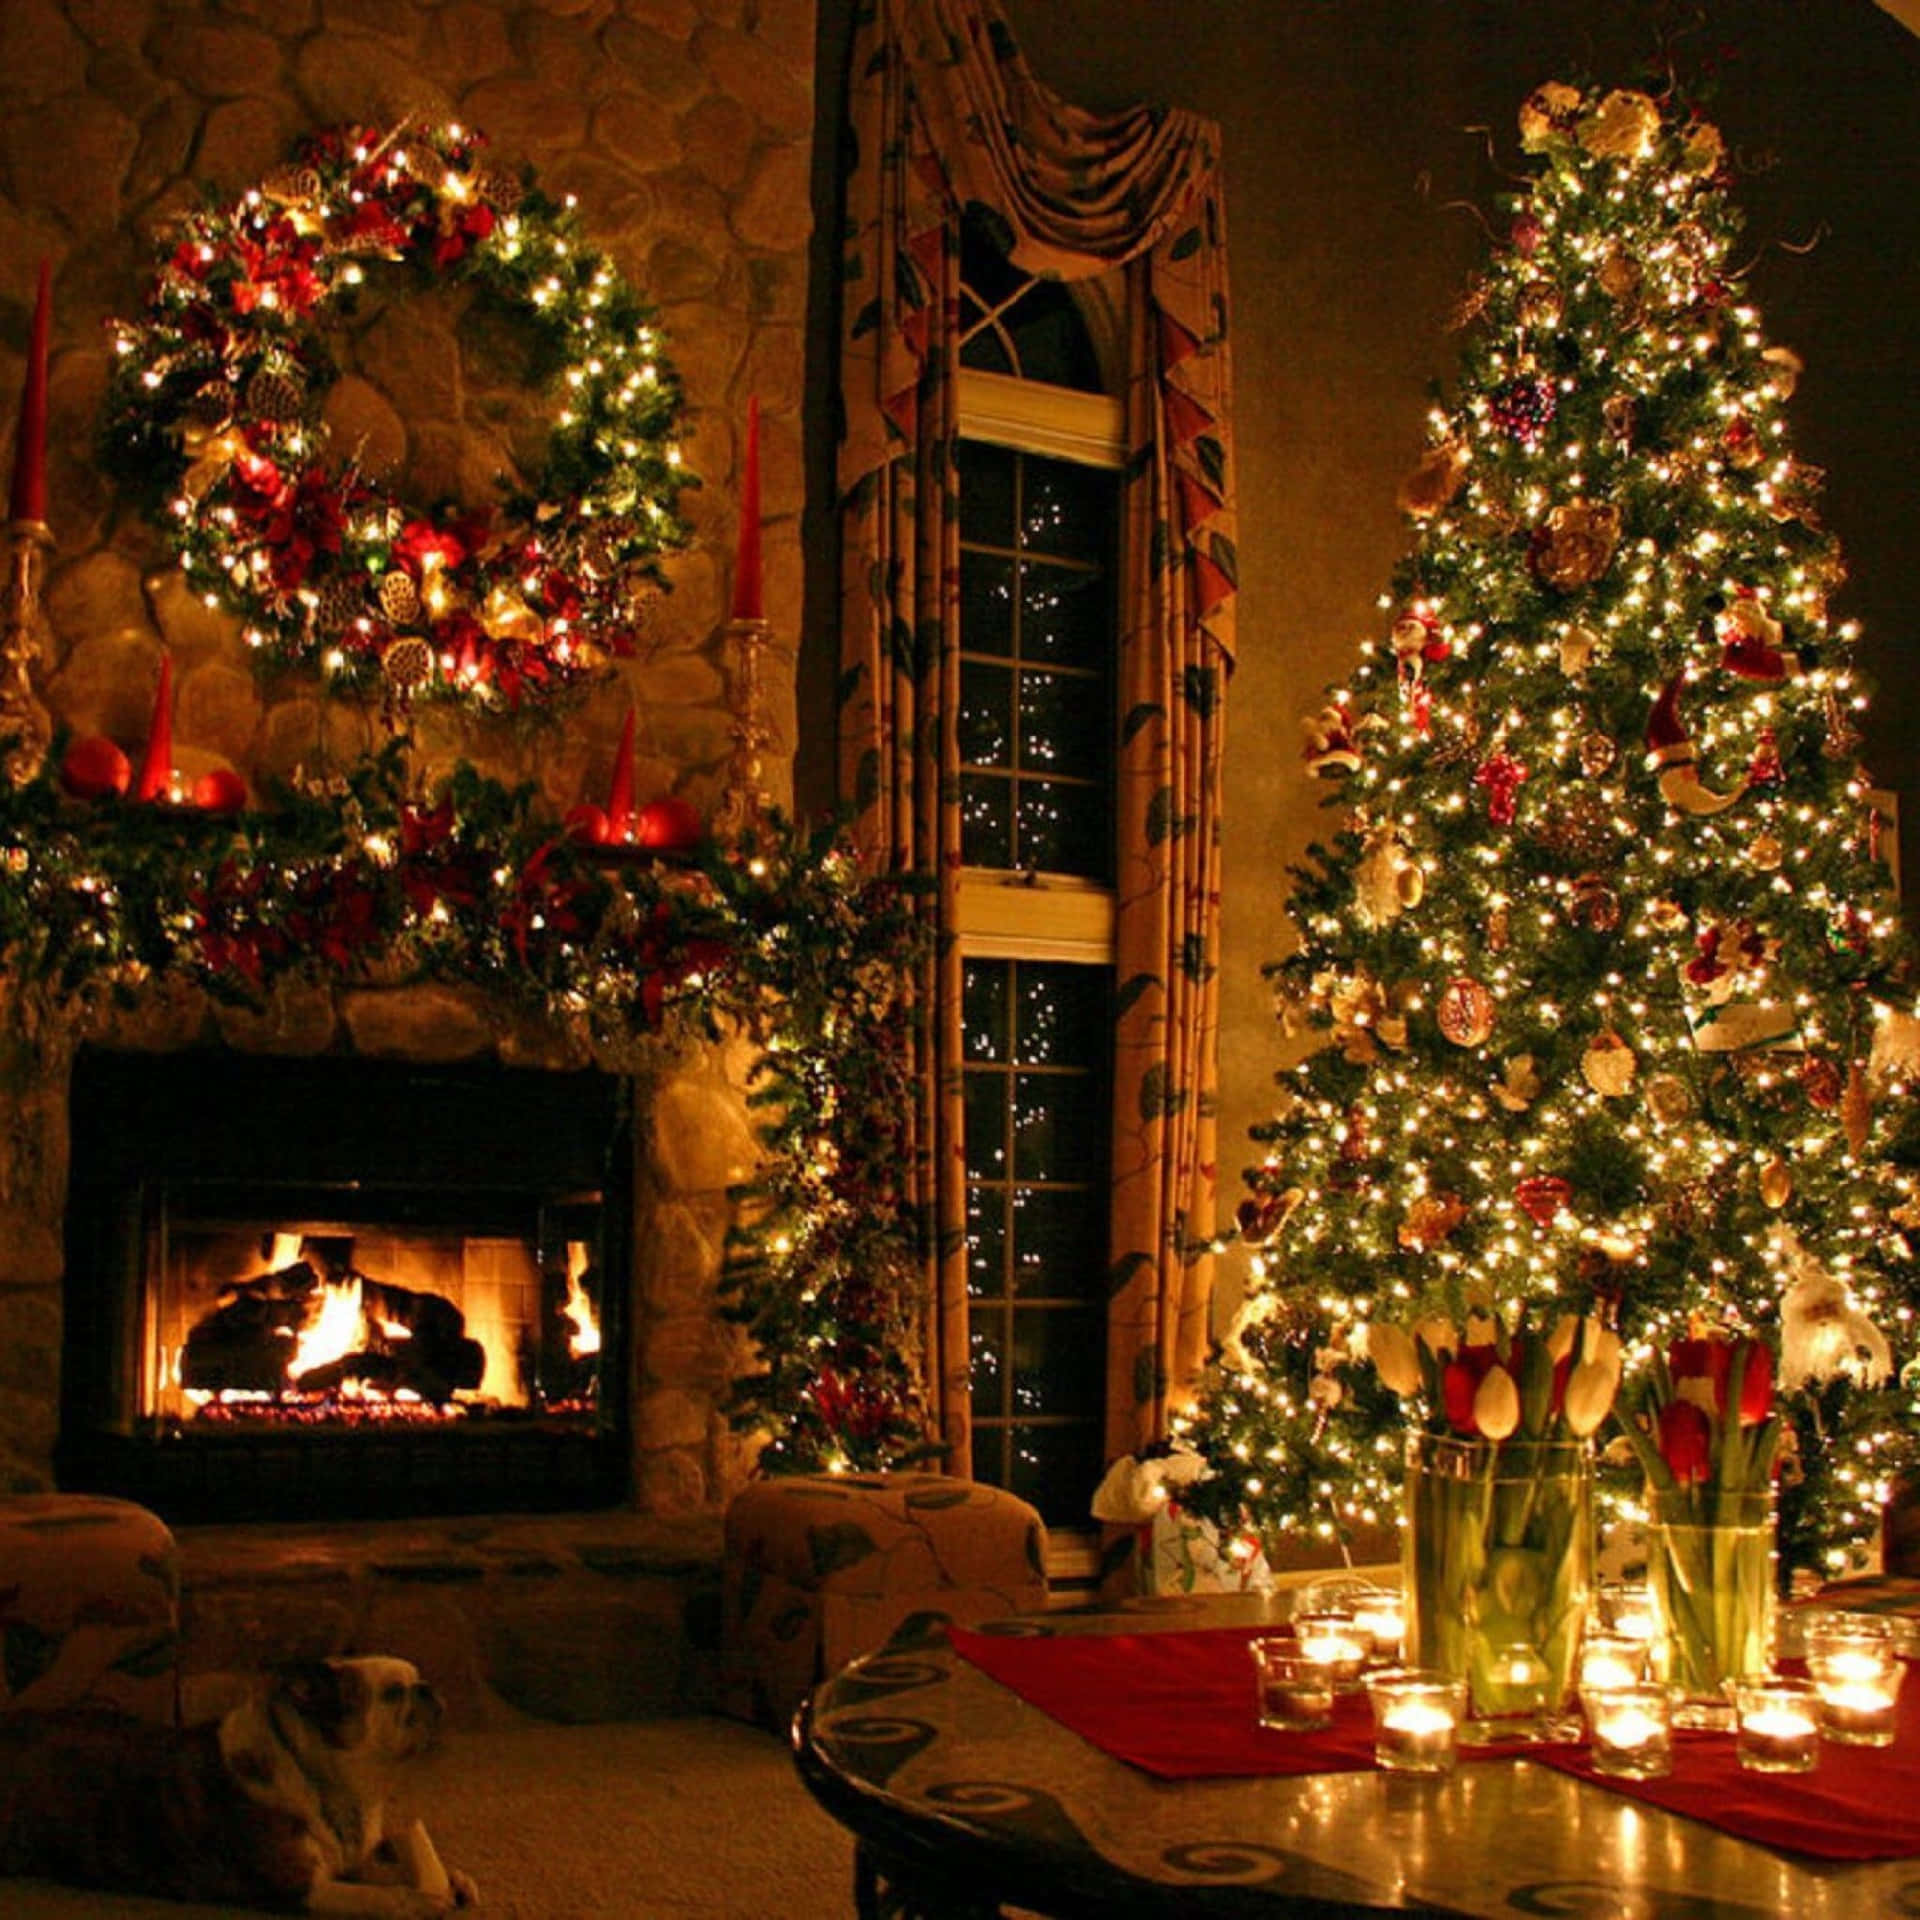 Christmas Tree In The Living Room With Candles Wallpaper